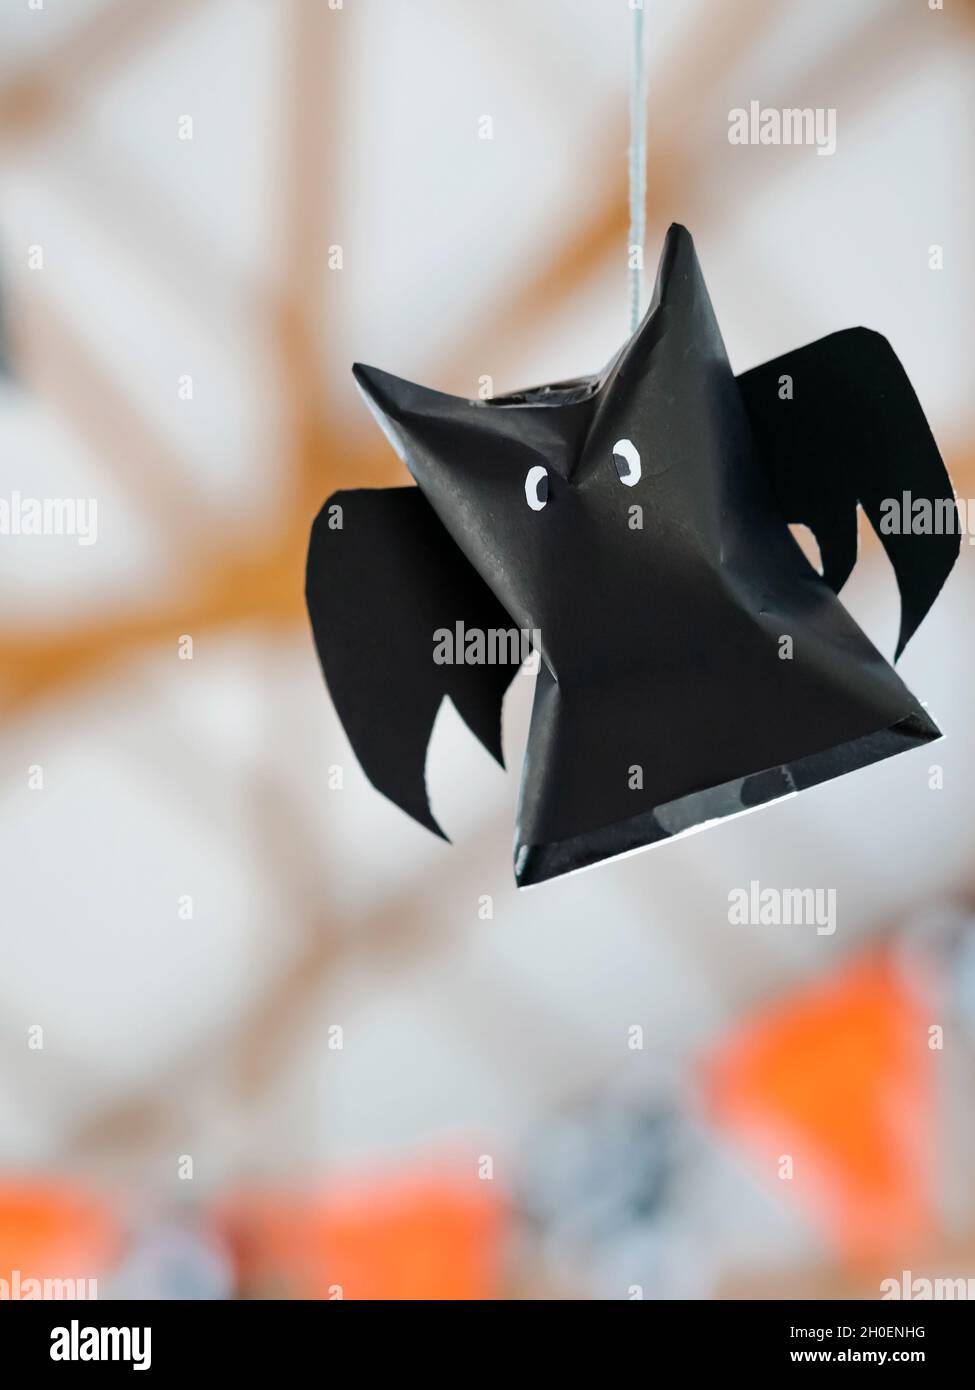 Origami bat made of black paper hanging on a rope for Halloween decorations.  Dark paper ghost Halloween party concept origami paper bat. The figure of  Stock Photo - Alamy